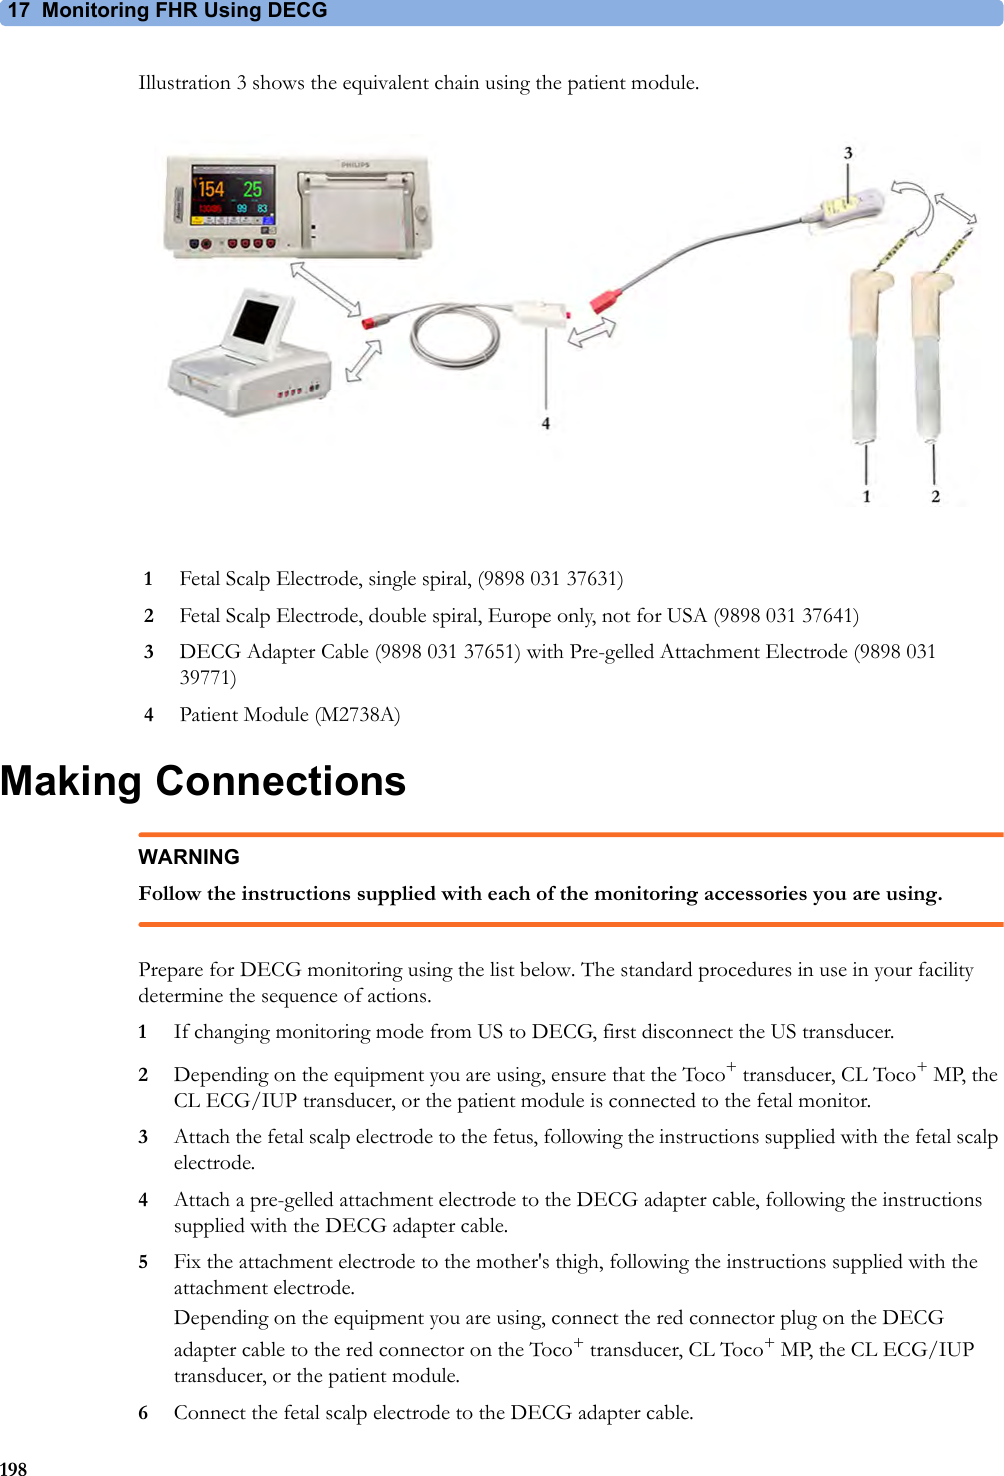 17 Monitoring FHR Using DECG198Illustration 3 shows the equivalent chain using the patient module.Making ConnectionsWARNINGFollow the instructions supplied with each of the monitoring accessories you are using.Prepare for DECG monitoring using the list below. The standard procedures in use in your facility determine the sequence of actions.1If changing monitoring mode from US to DECG, first disconnect the US transducer.2Depending on the equipment you are using, ensure that the Toco+ transducer, CL Toco+MP, the CL ECG/IUP transducer, or the patient module is connected to the fetal monitor. 3Attach the fetal scalp electrode to the fetus, following the instructions supplied with the fetal scalp electrode.4Attach a pre-gelled attachment electrode to the DECG adapter cable, following the instructions supplied with the DECG adapter cable. 5Fix the attachment electrode to the mother&apos;s thigh, following the instructions supplied with the attachment electrode.Depending on the equipment you are using, connect the red connector plug on the DECG adapter cable to the red connector on the Toco+ transducer, CL Toco+MP, the CL ECG/IUP transducer, or the patient module.6Connect the fetal scalp electrode to the DECG adapter cable.1Fetal Scalp Electrode, single spiral, (9898 031 37631)2Fetal Scalp Electrode, double spiral, Europe only, not for USA (9898 031 37641)3DECG Adapter Cable (9898 031 37651) with Pre-gelled Attachment Electrode (9898 031 39771)4Patient Module (M2738A)